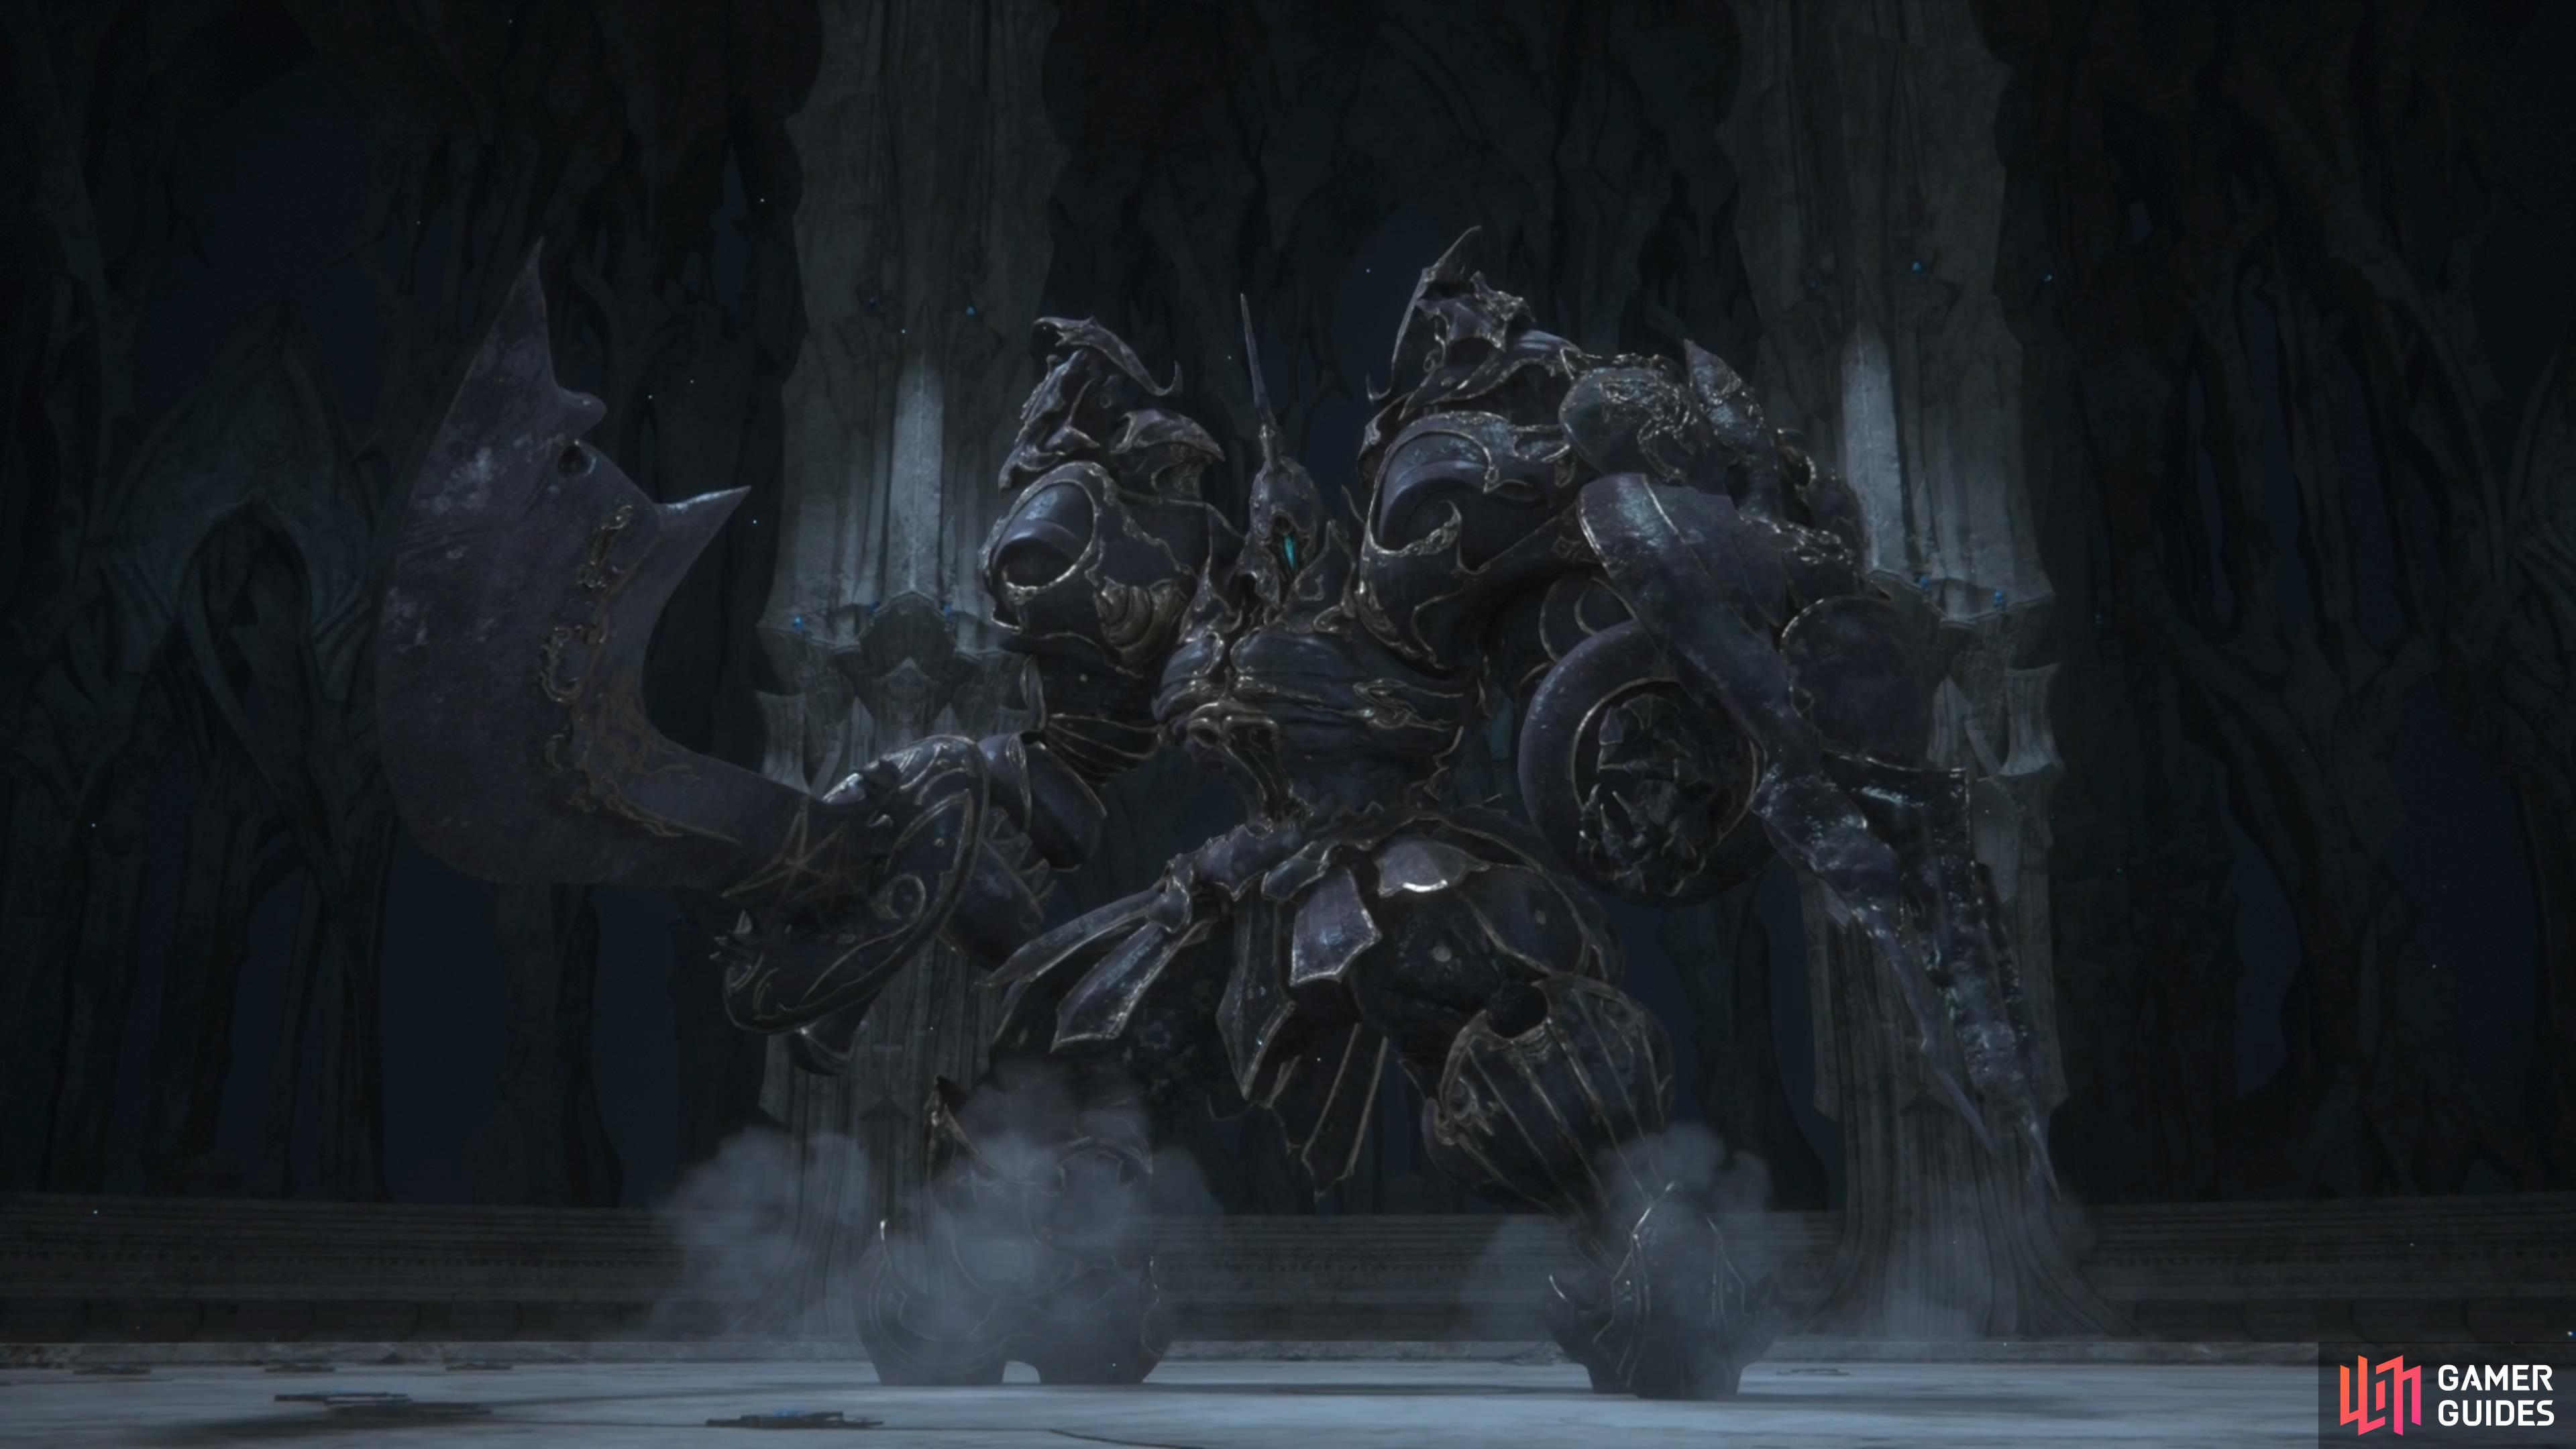 The Iron Giant boss in FF16 definitely looks imposing.